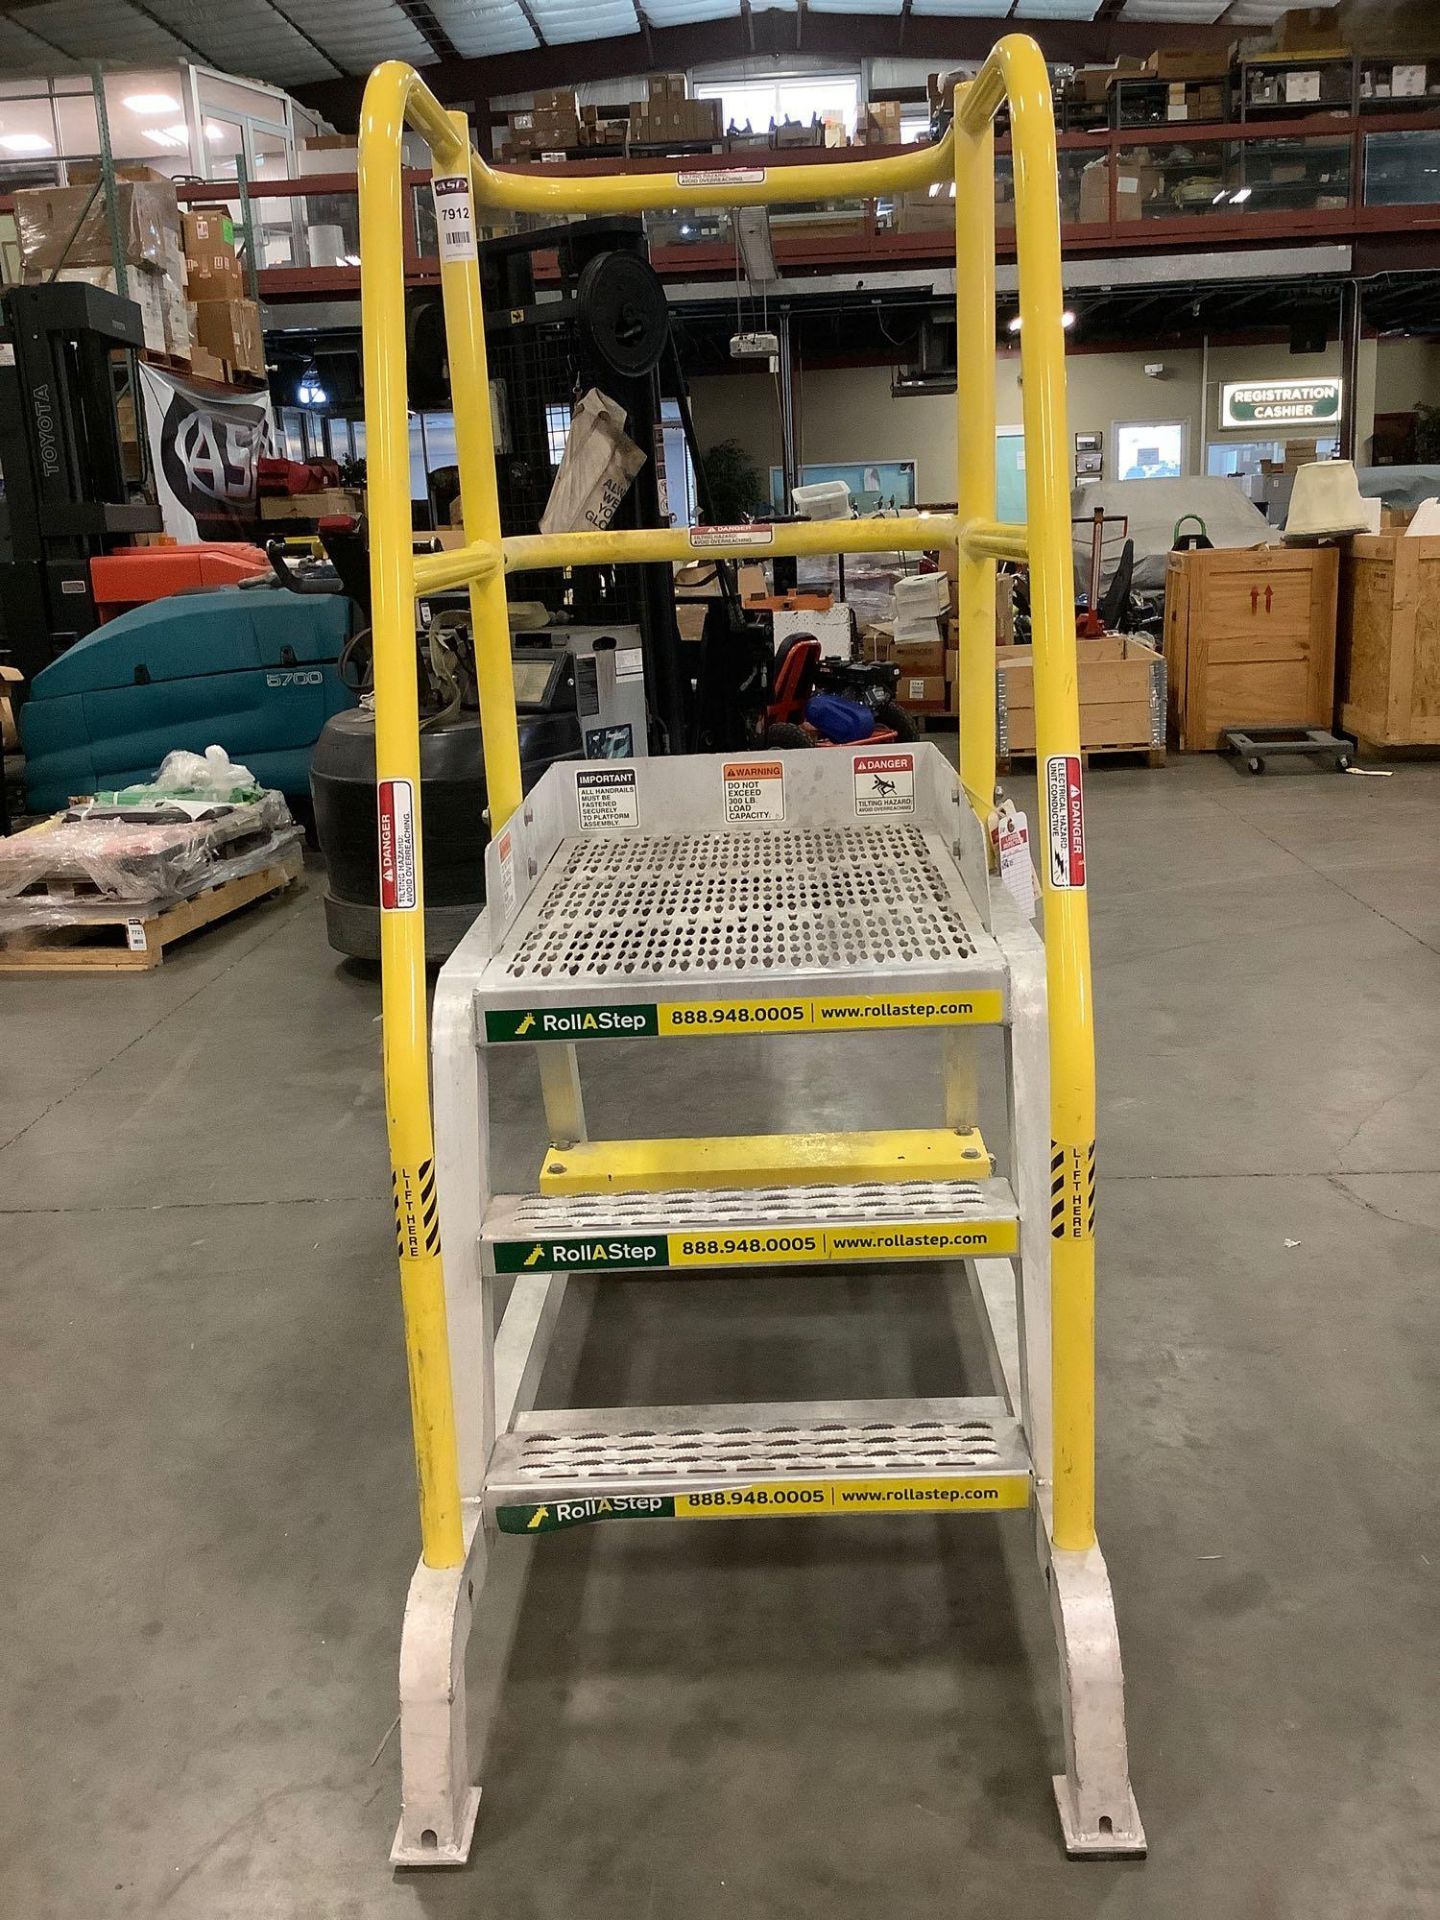 ROLLASTEP TR TILT N ROLL SERIES INDUSTRIAL LADDER, ALUMINUM CONSTRUCTION, APPROX 70in TALL x 32in WI - Image 9 of 9